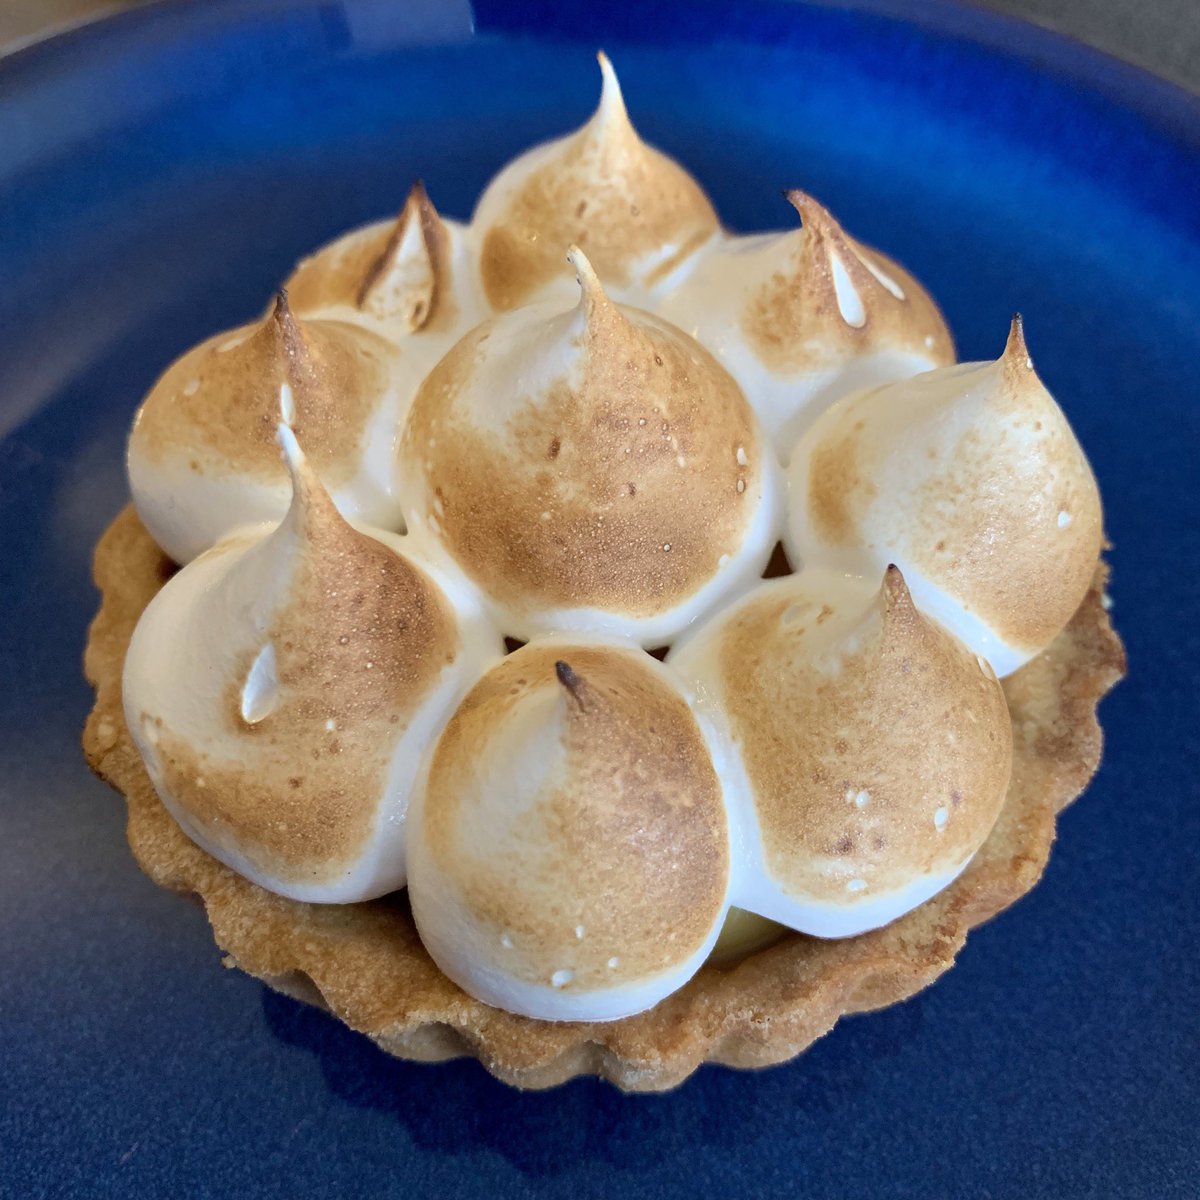 So this was rather delicious. Lemon Meringue pie from @AbbisPantry at @leith_market #Leith